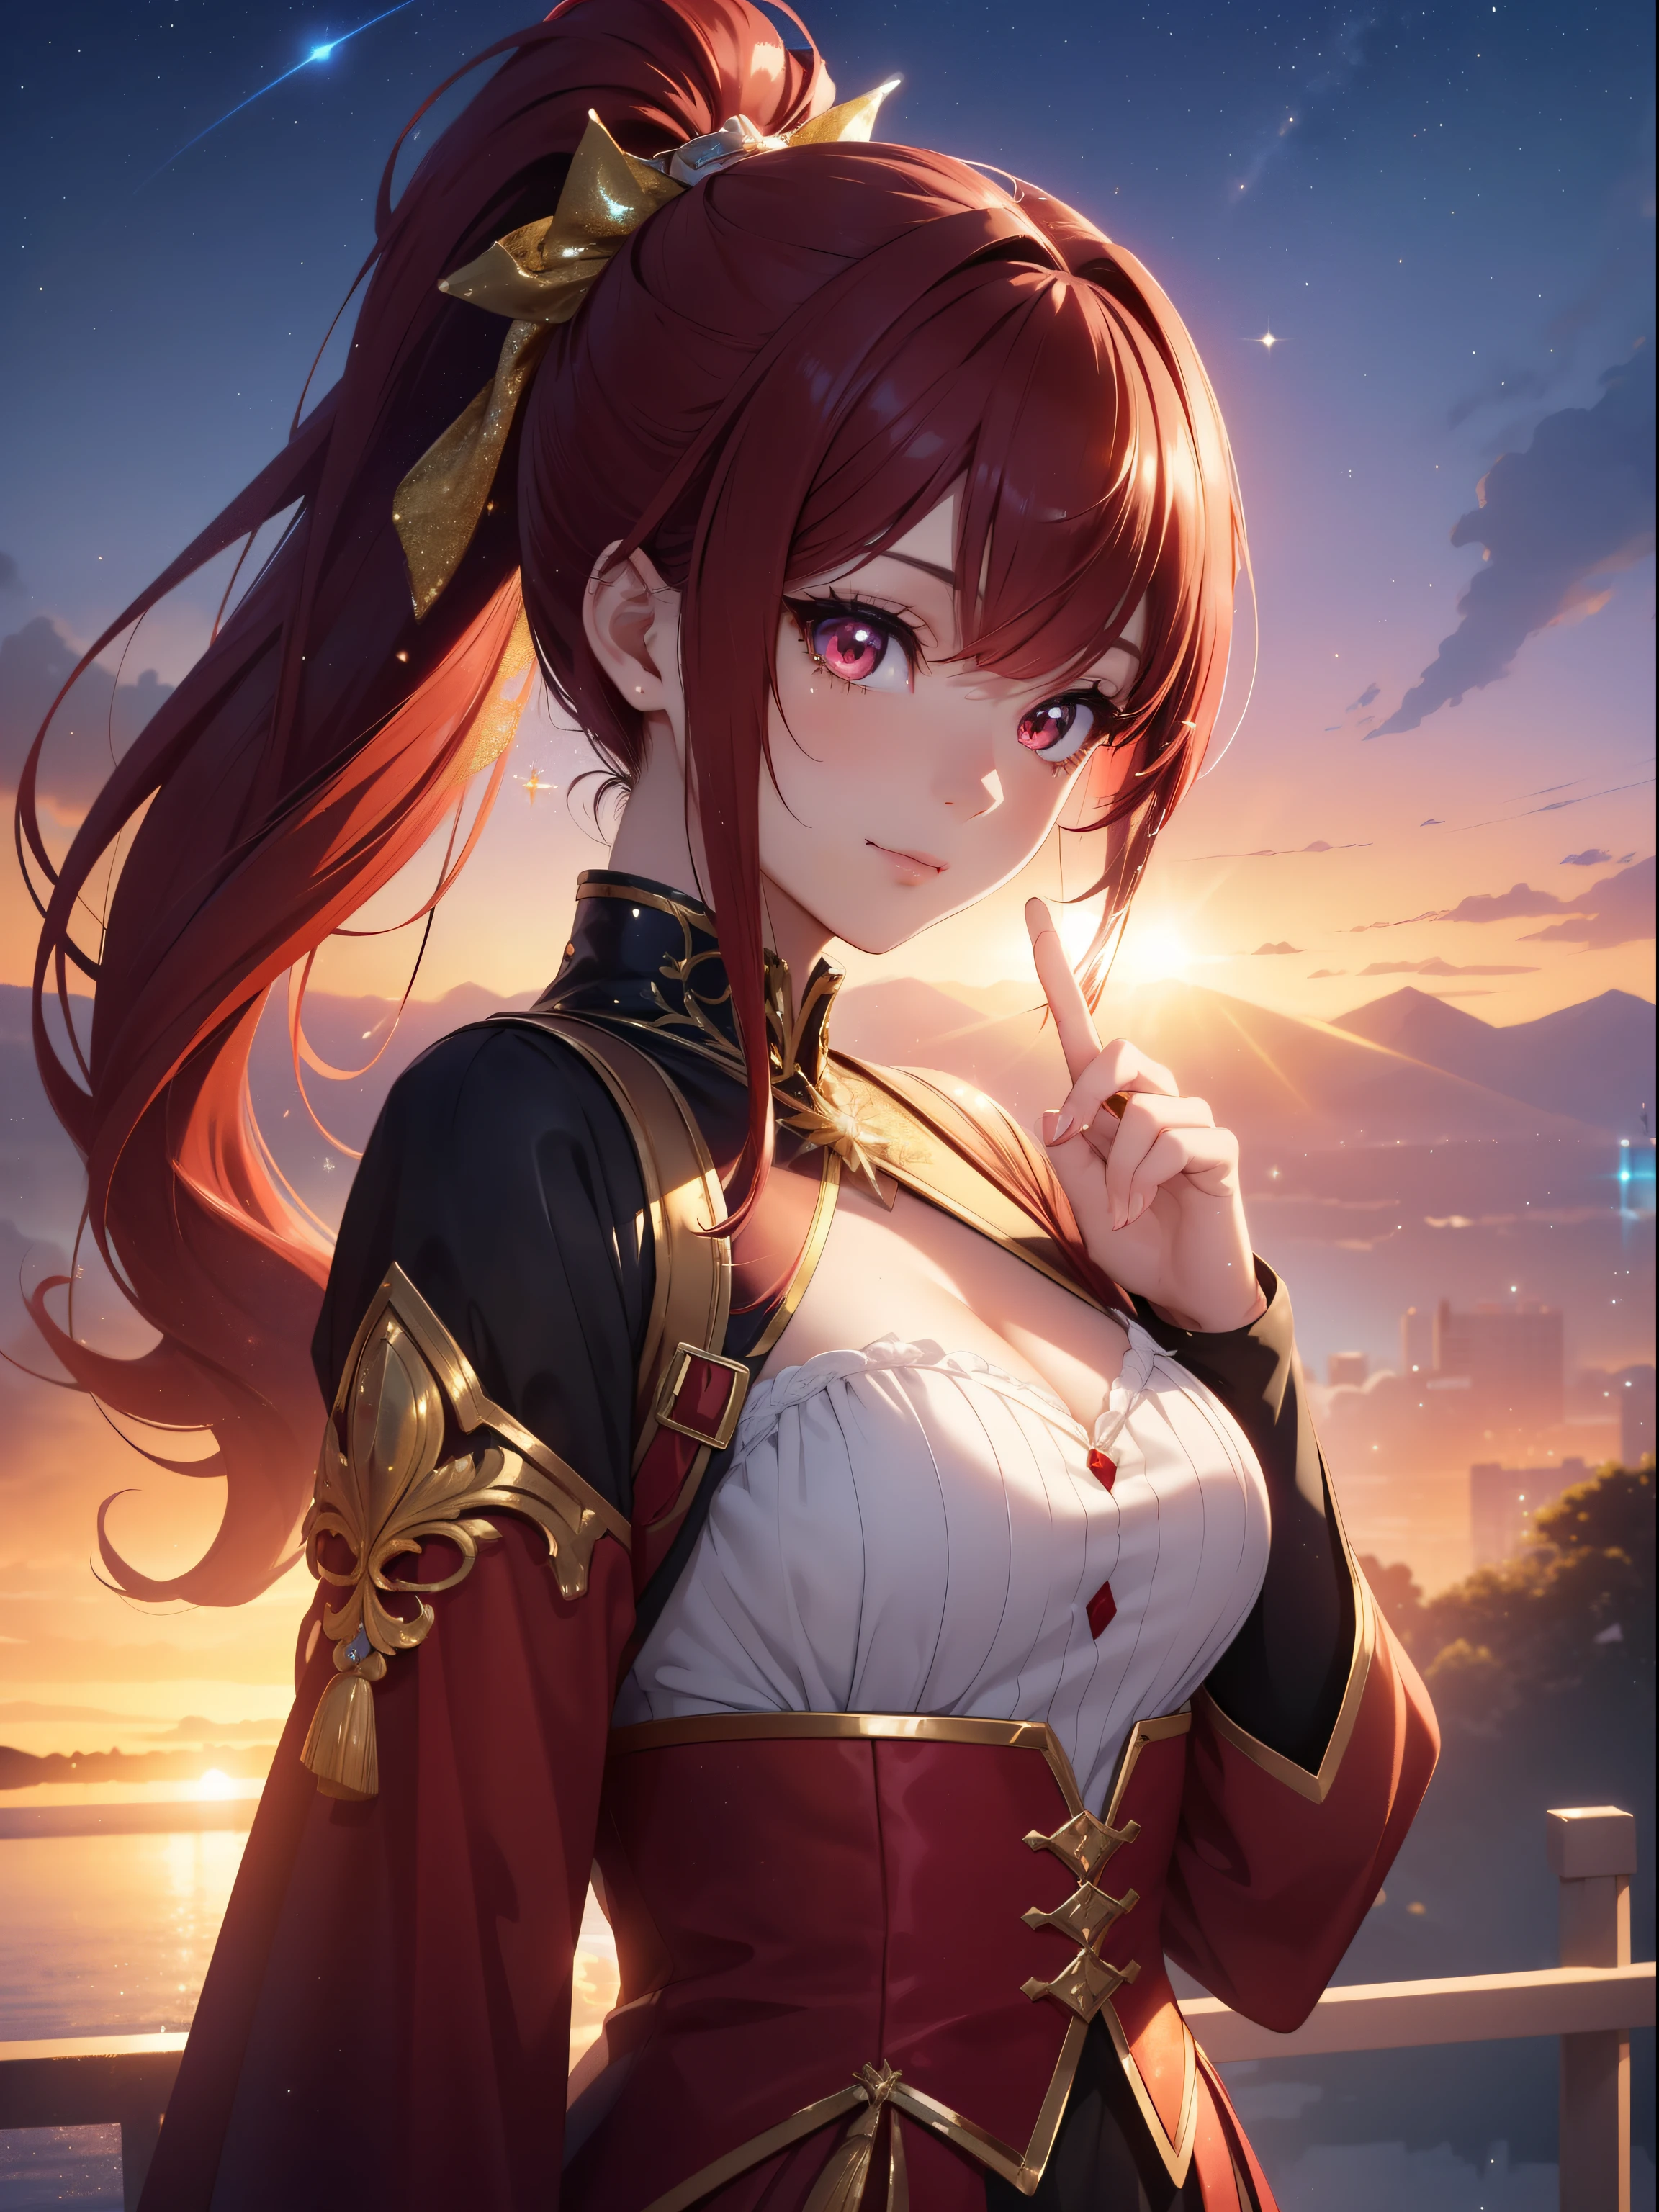 masutepiece, High resolution, 8K, anime woman, Delicate and detailed writing 、Detailed digital illustration、absurdly long hair、(((Ponytail)))、Shiny hair、a very beautiful woman、Eyes are double, Large,Little hanging eyes、 Bust E Cup、High image quality, High quality、Detailed background、((Detailed and beautiful sunset sky background))、The inside of the eye shines like a diamond、(((Dark red hair)))、Gradient pupil、(((2 arms、4 fingers, 1 thumb)))、Detailed female face、a very beautiful woman、、Detailed background、​masterpiece、Soft Focus , Bright gradient watercolor , Lens Flare , (((glitter))) , Glow , Dreamy ,a miniskirt、idol、Light red Ribbon、Very beautiful light red rose hair accessories、Light red and gold costume with white as the main color、((Macroface))、(Cool Girl).Tall lady、Dignified.((No bangs))、A smile、